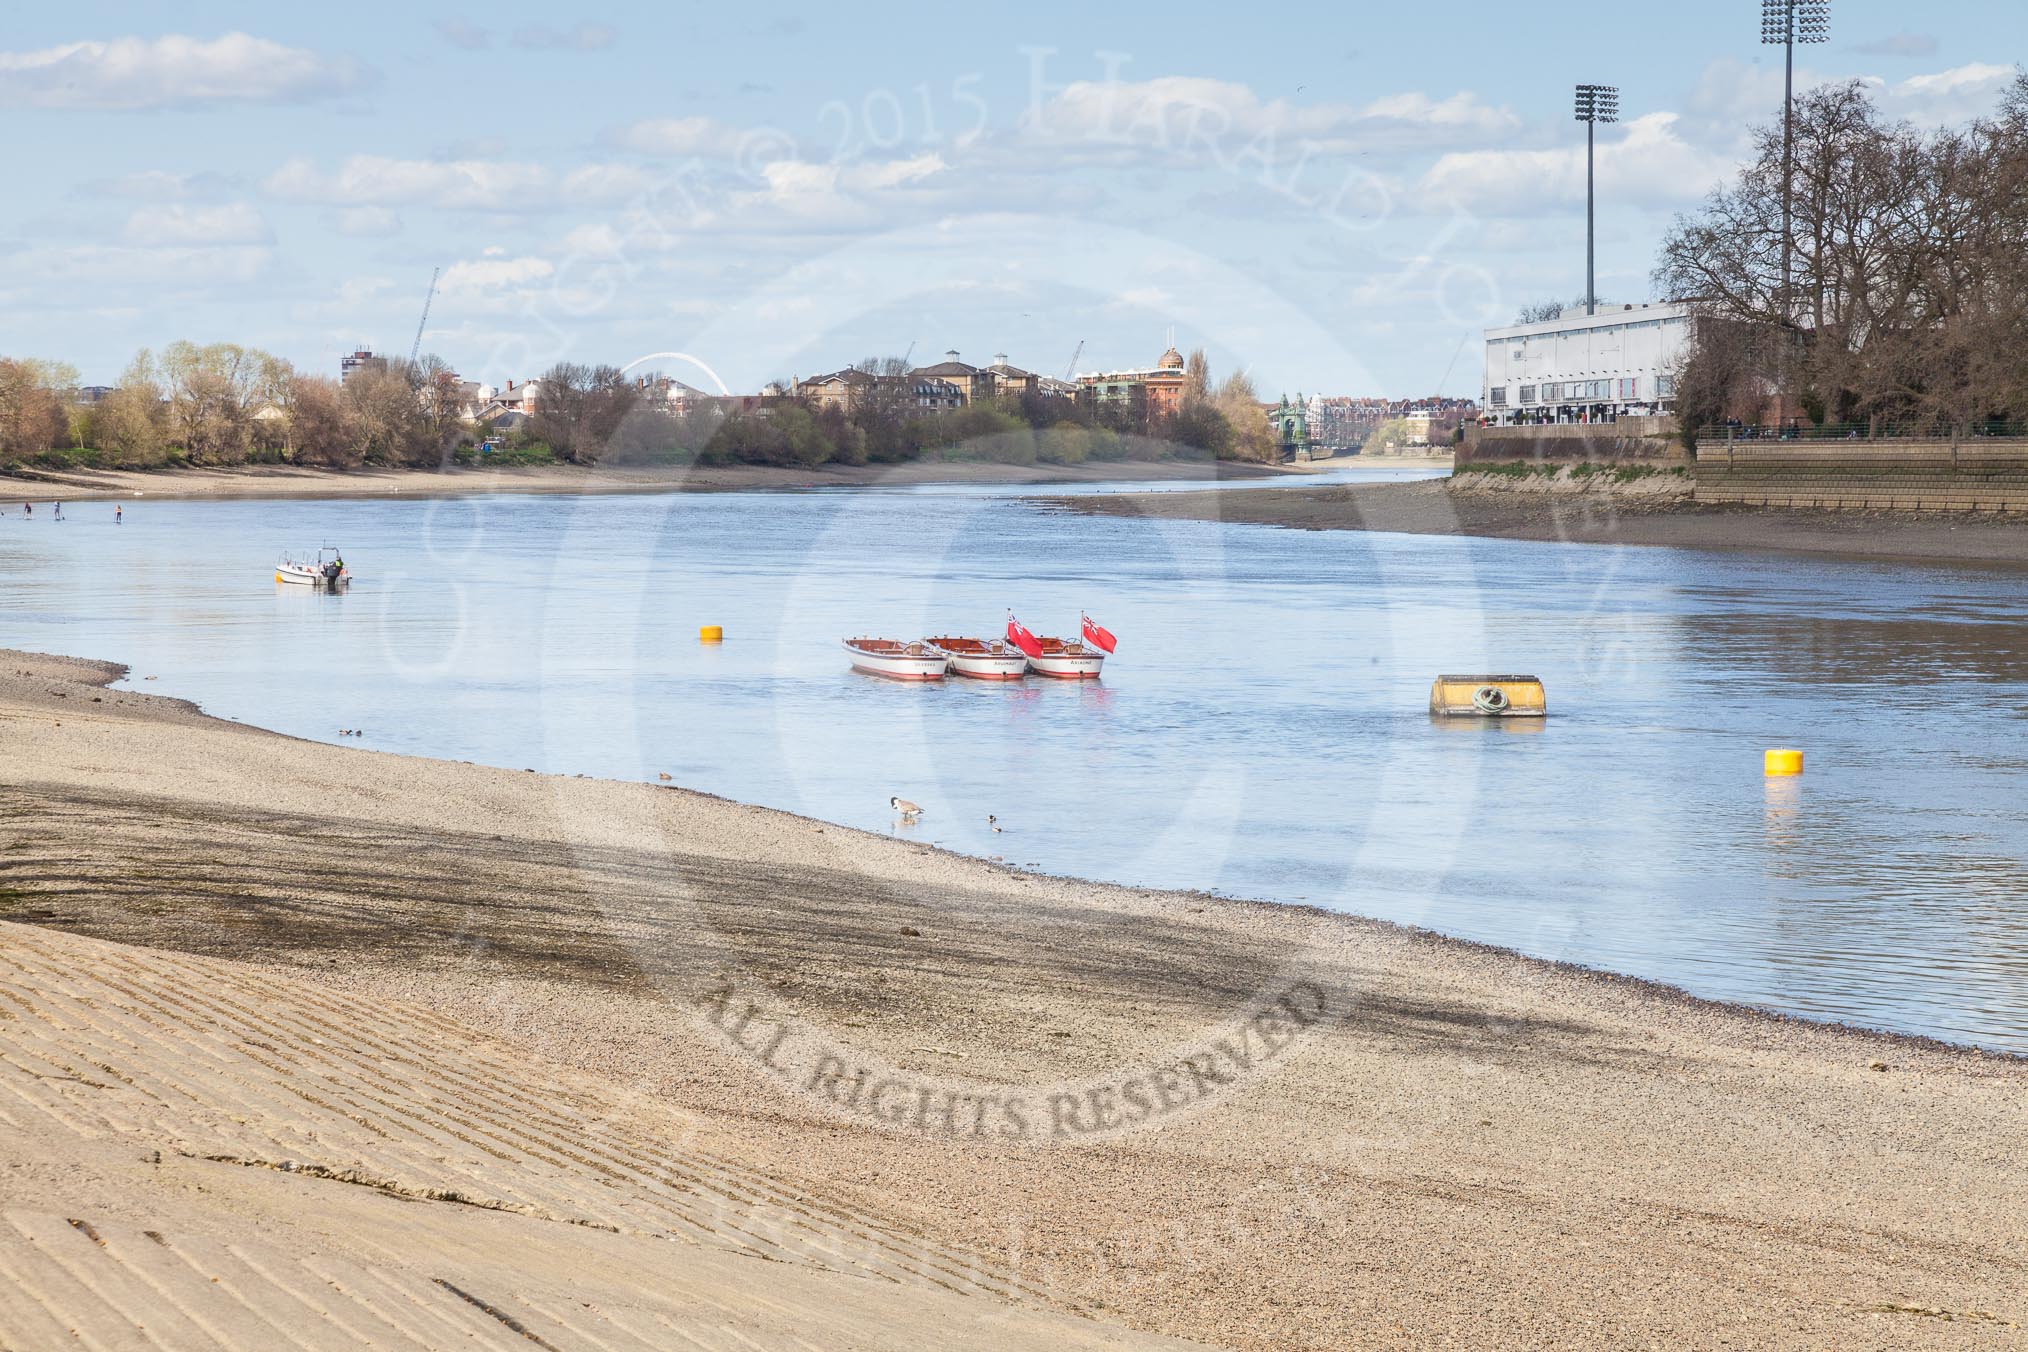 The Boat Race season 2015 - Newton Women's Boat Race.
River Thames between Putney and Mortlake,
London,

United Kingdom,
on 11 April 2015 at 14:18, image #24